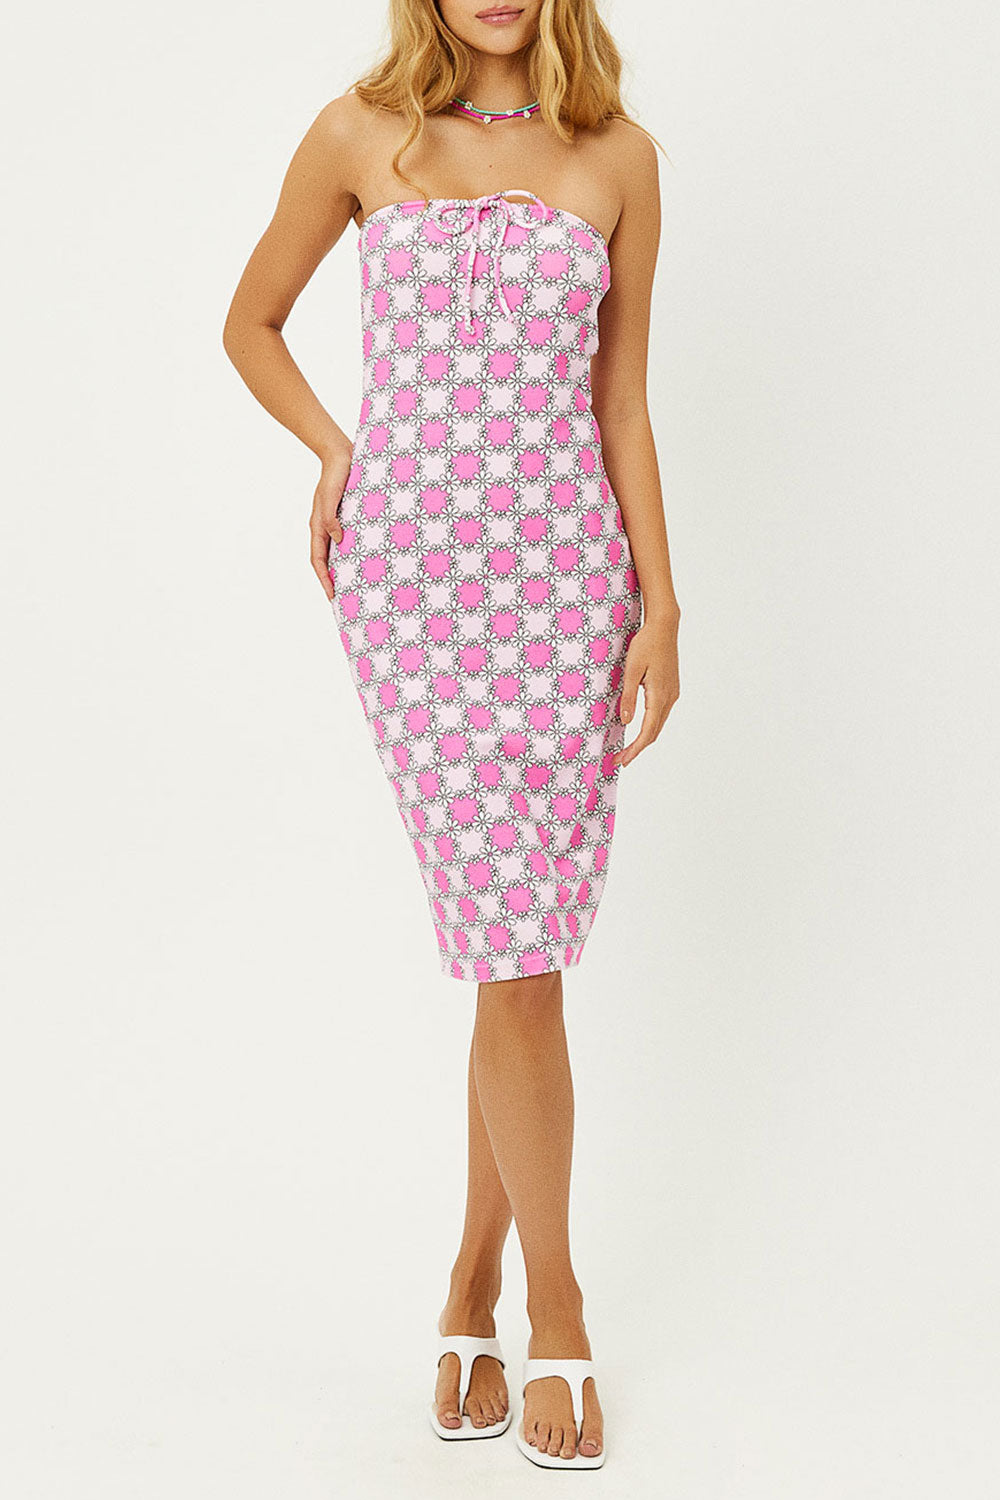 Hope Strapless Terry Dress - Pink Daisy